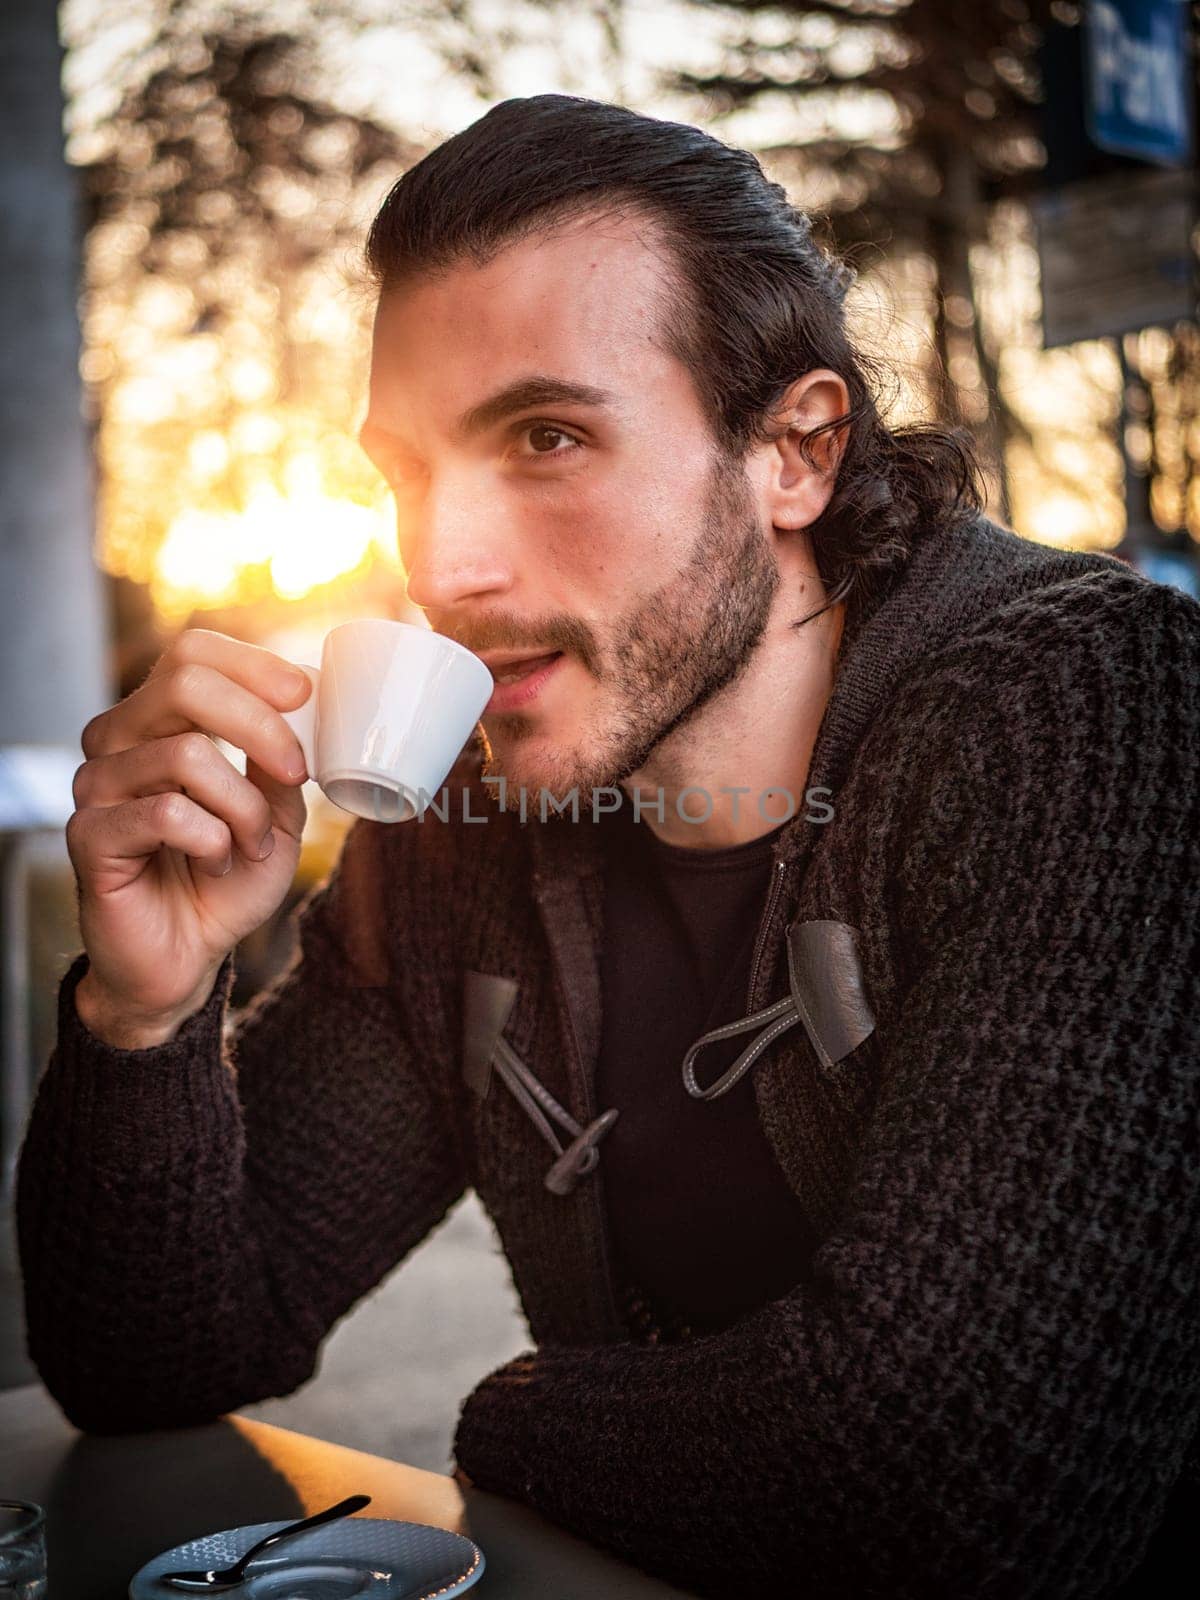 One handsome young man drinking espresso coffee, sitting outside in urban setting in European city